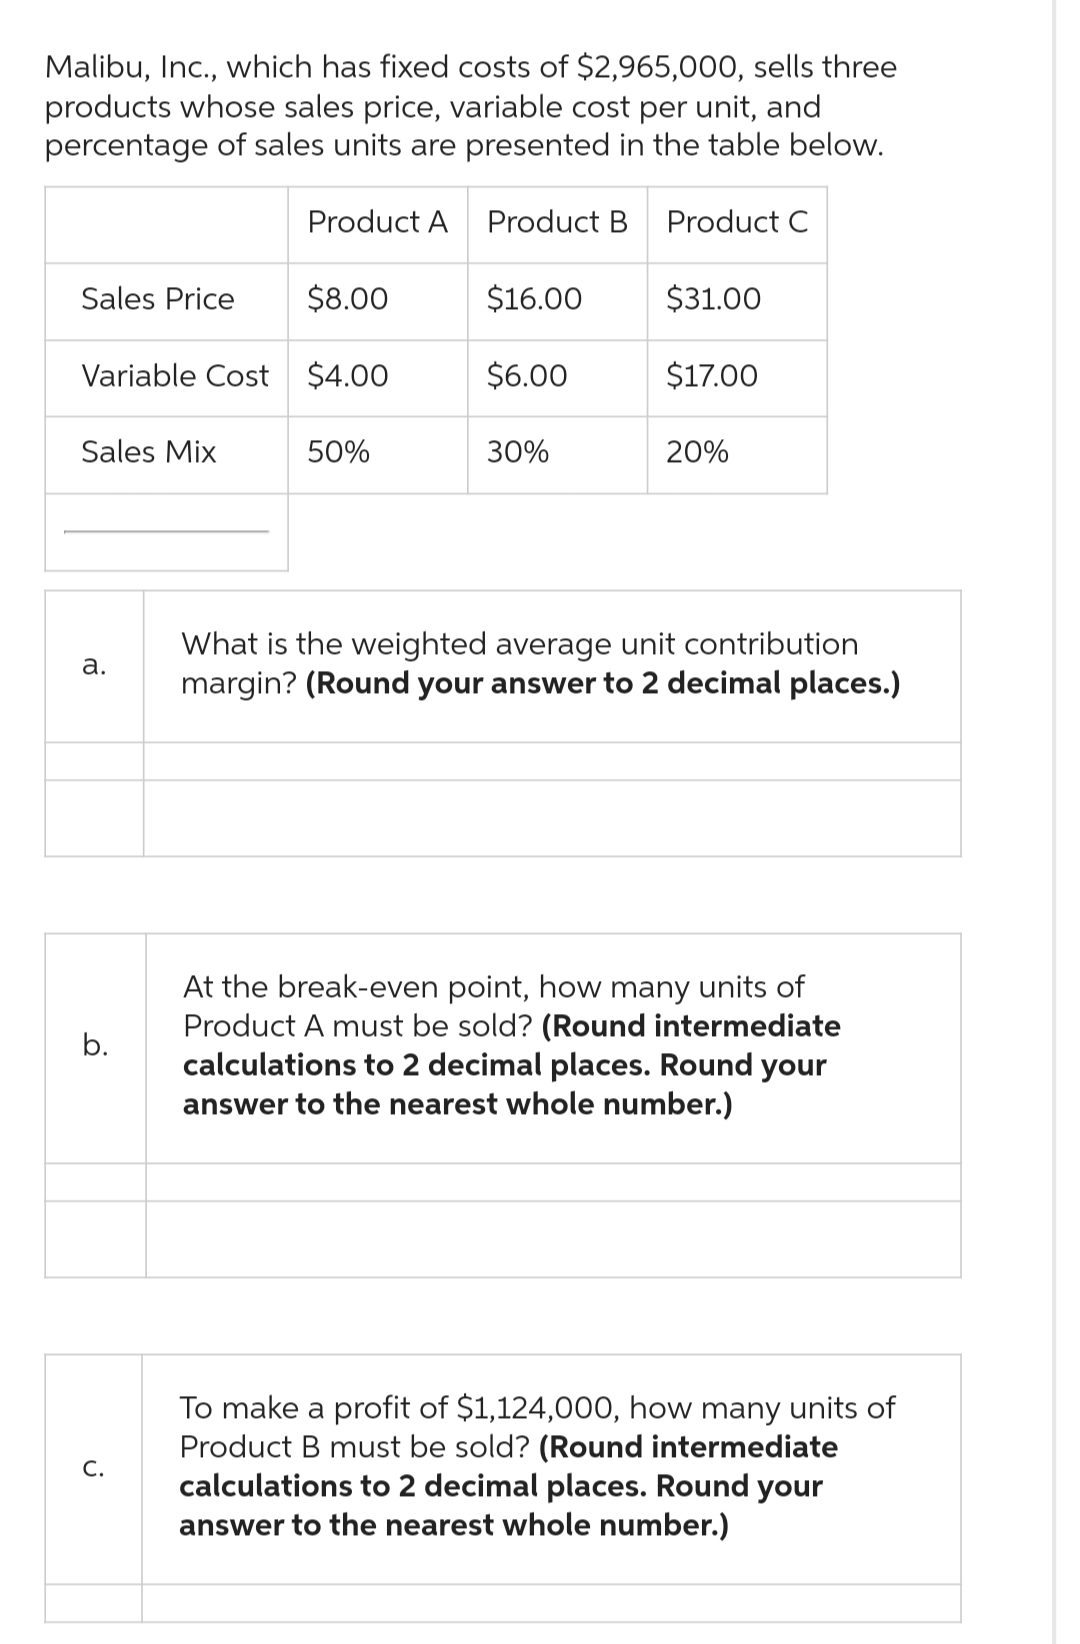 Malibu, Inc., which has fixed costs of $2,965,000, sells three
products whose sales price, variable cost per unit, and
percentage of sales units are presented in the table below.
Sales Price
Sales Mix
Variable Cost $4.00
a.
b.
Product A
C.
$8.00
50%
Product B
$16.00
$6.00
30%
Product C
$31.00
$17.00
20%
What is the weighted average unit contribution
margin? (Round your answer to 2 decimal places.)
At the break-even point, how many units of
Product A must be sold? (Round intermediate
calculations to 2 decimal places. Round your
answer to the nearest whole number.)
To make a profit of $1,124,000, how many units of
Product B must be sold? (Round intermediate
calculations to 2 decimal places. Round your
answer to the nearest whole number.)